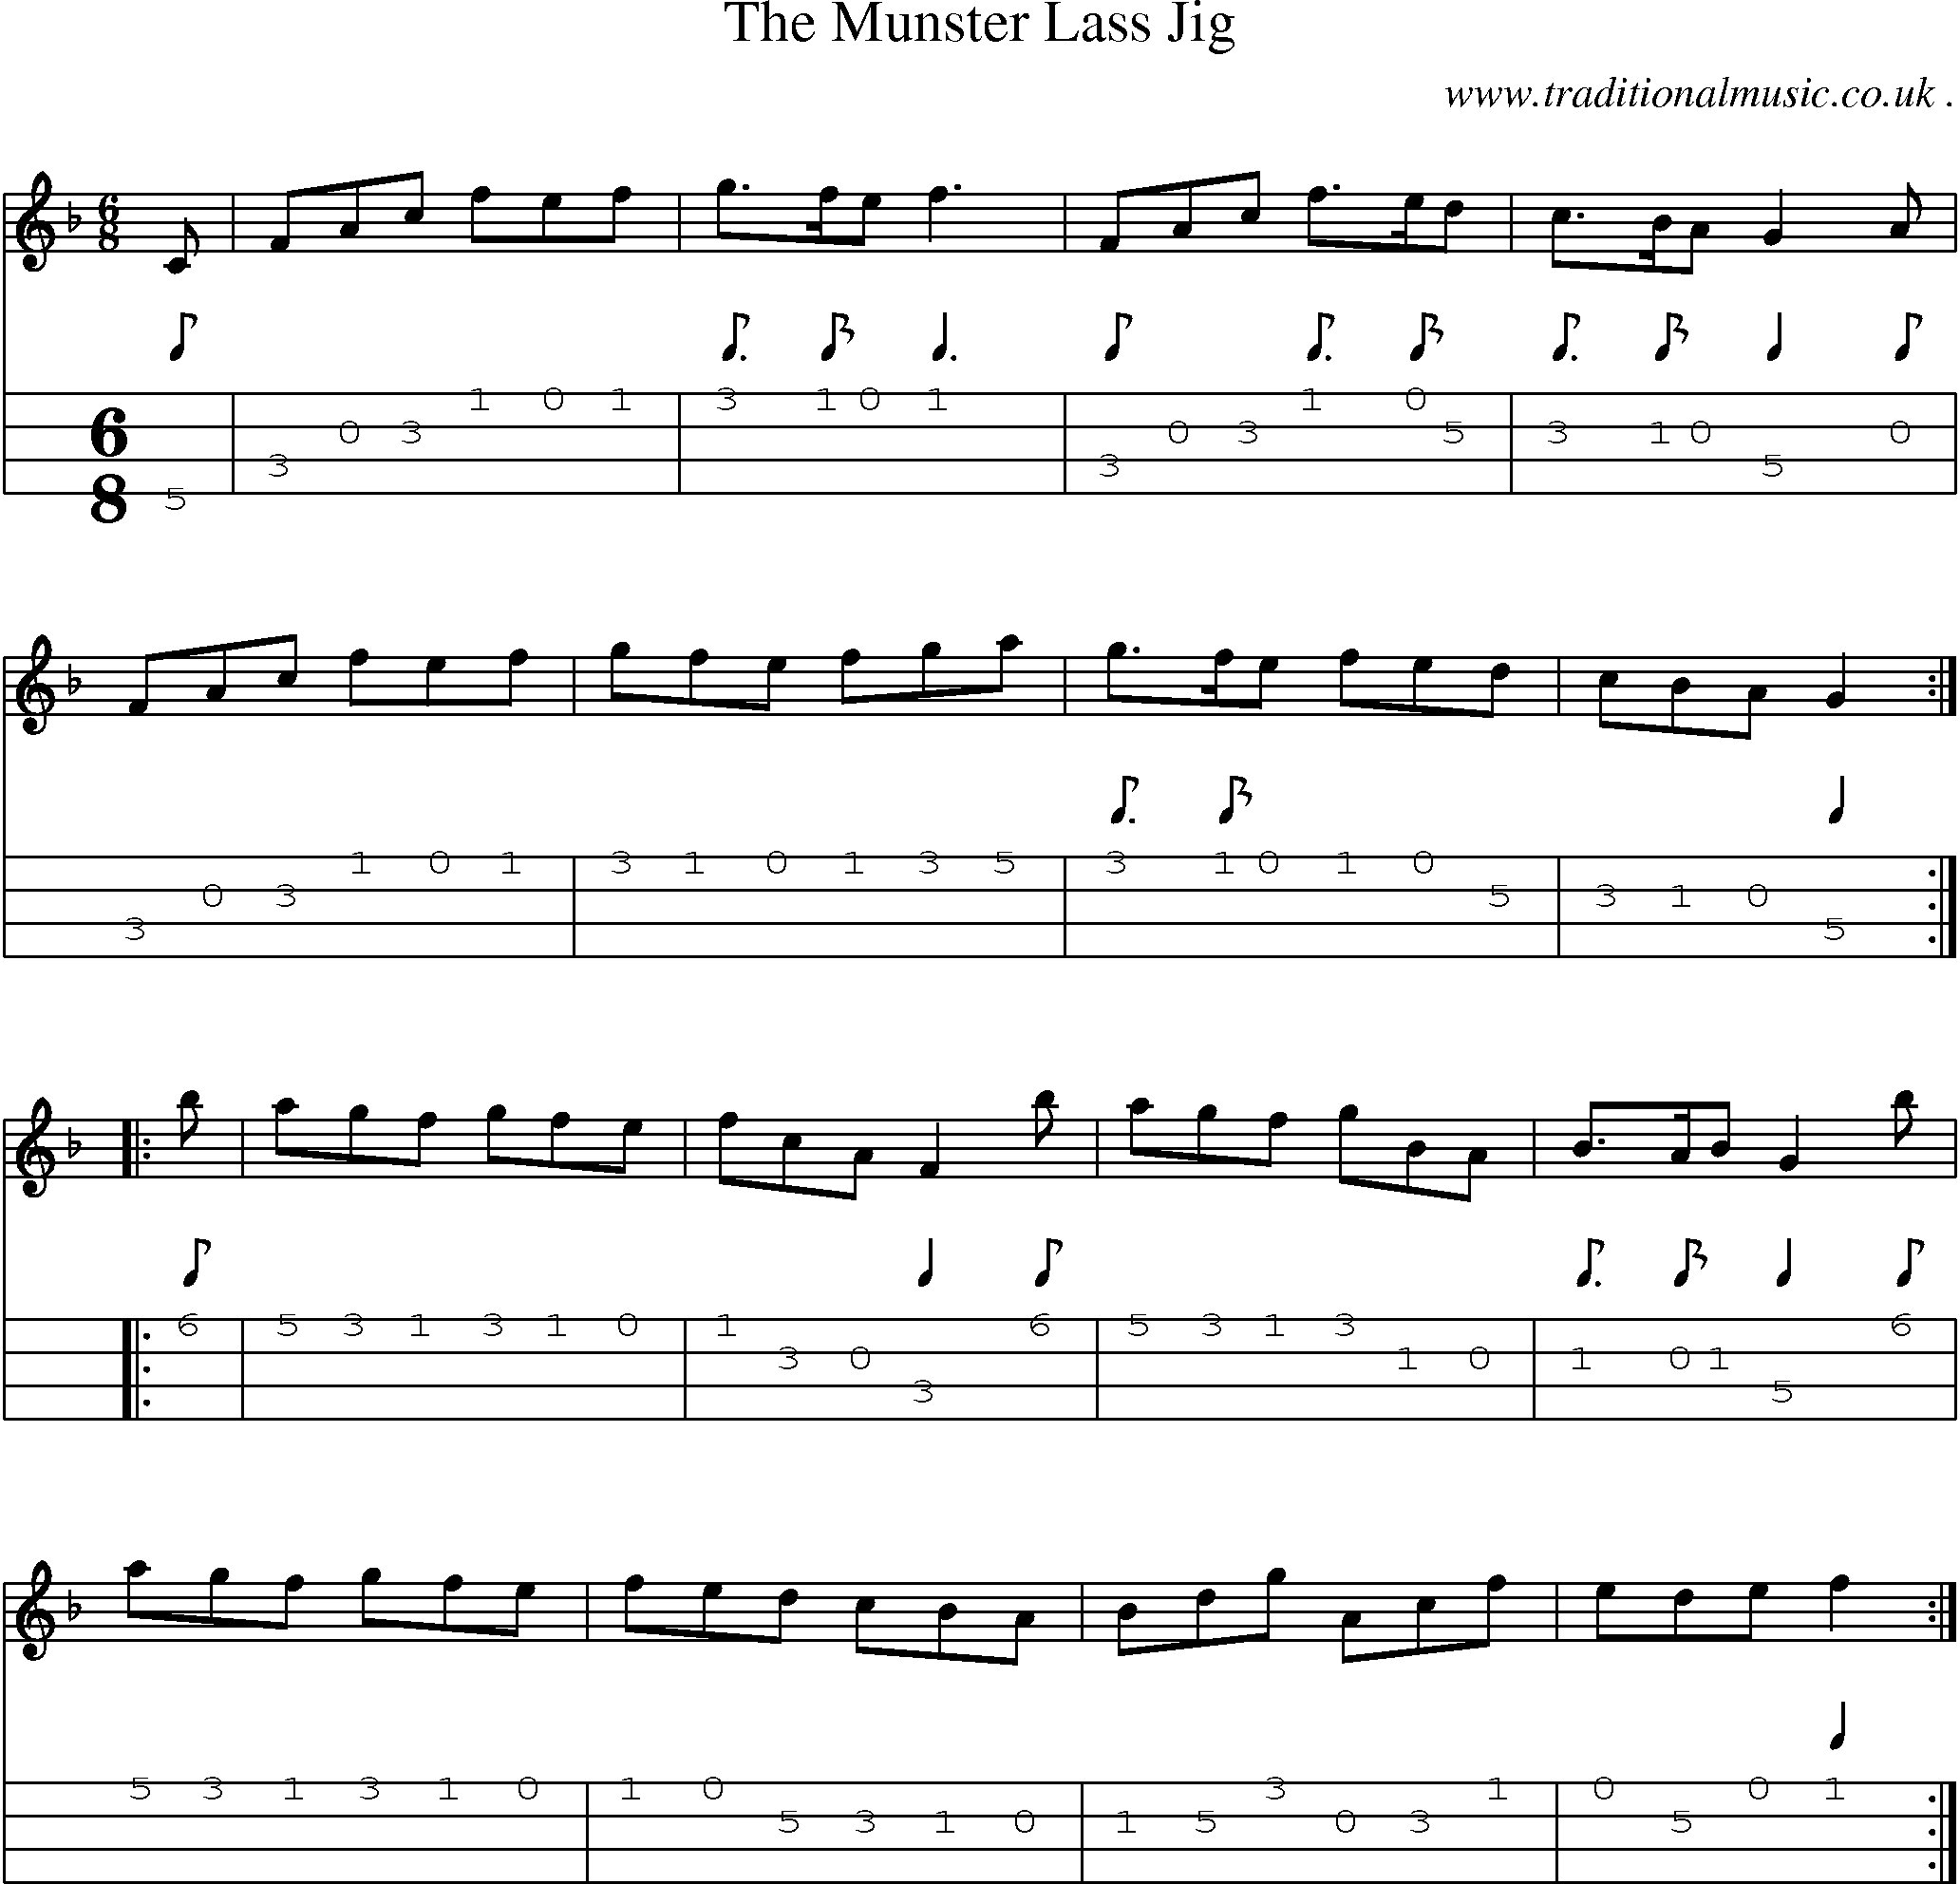 Sheet-Music and Mandolin Tabs for The Munster Lass Jig